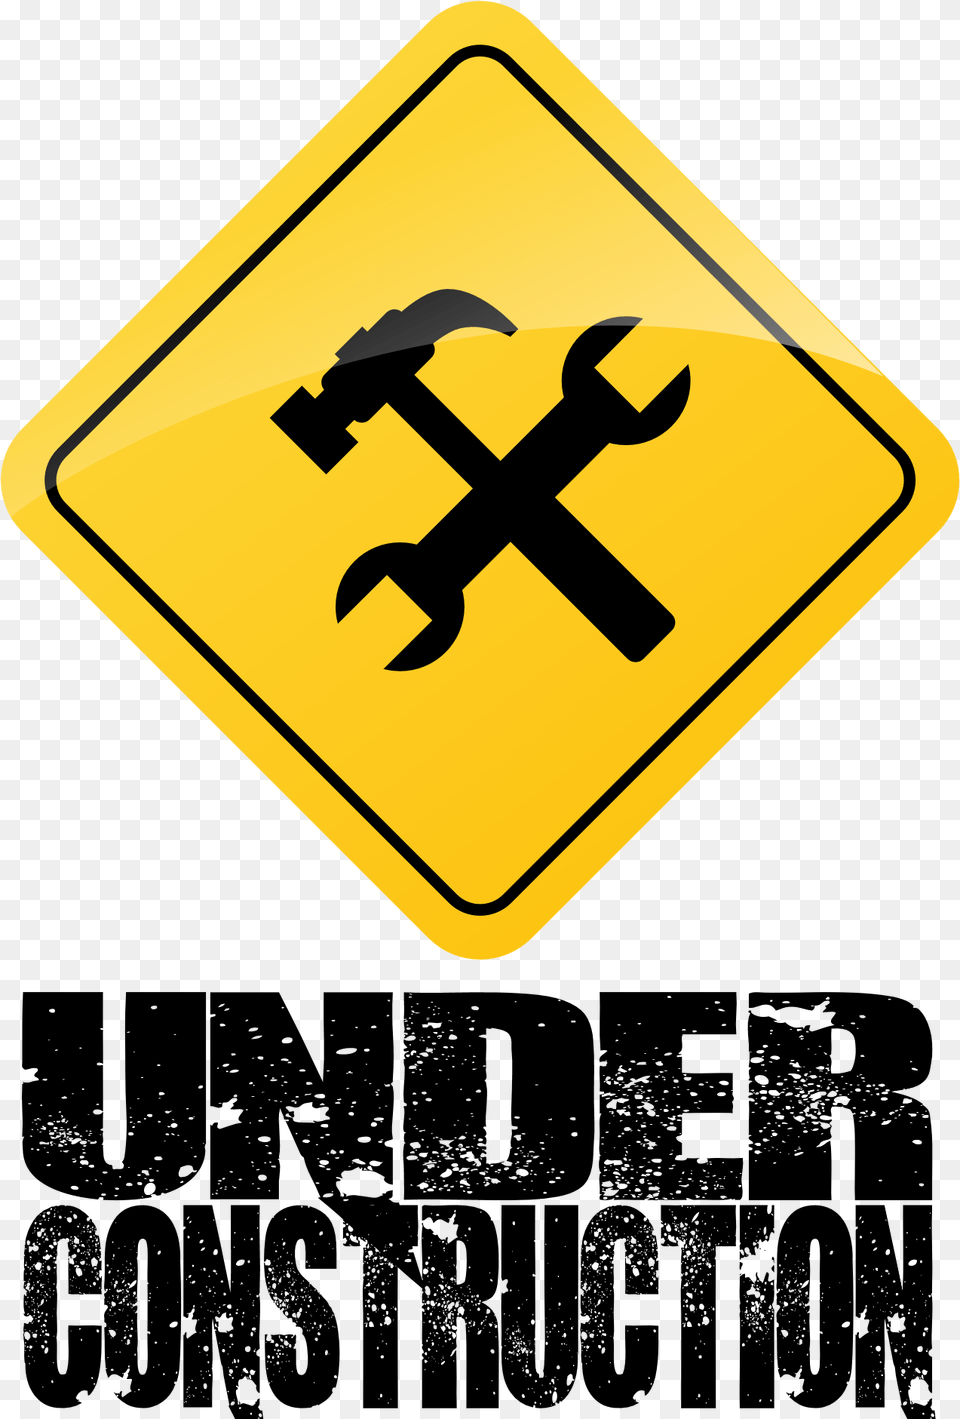 Construction Safety Site Banner Construction Site Safety Banners, Sign, Symbol, Road Sign Free Transparent Png